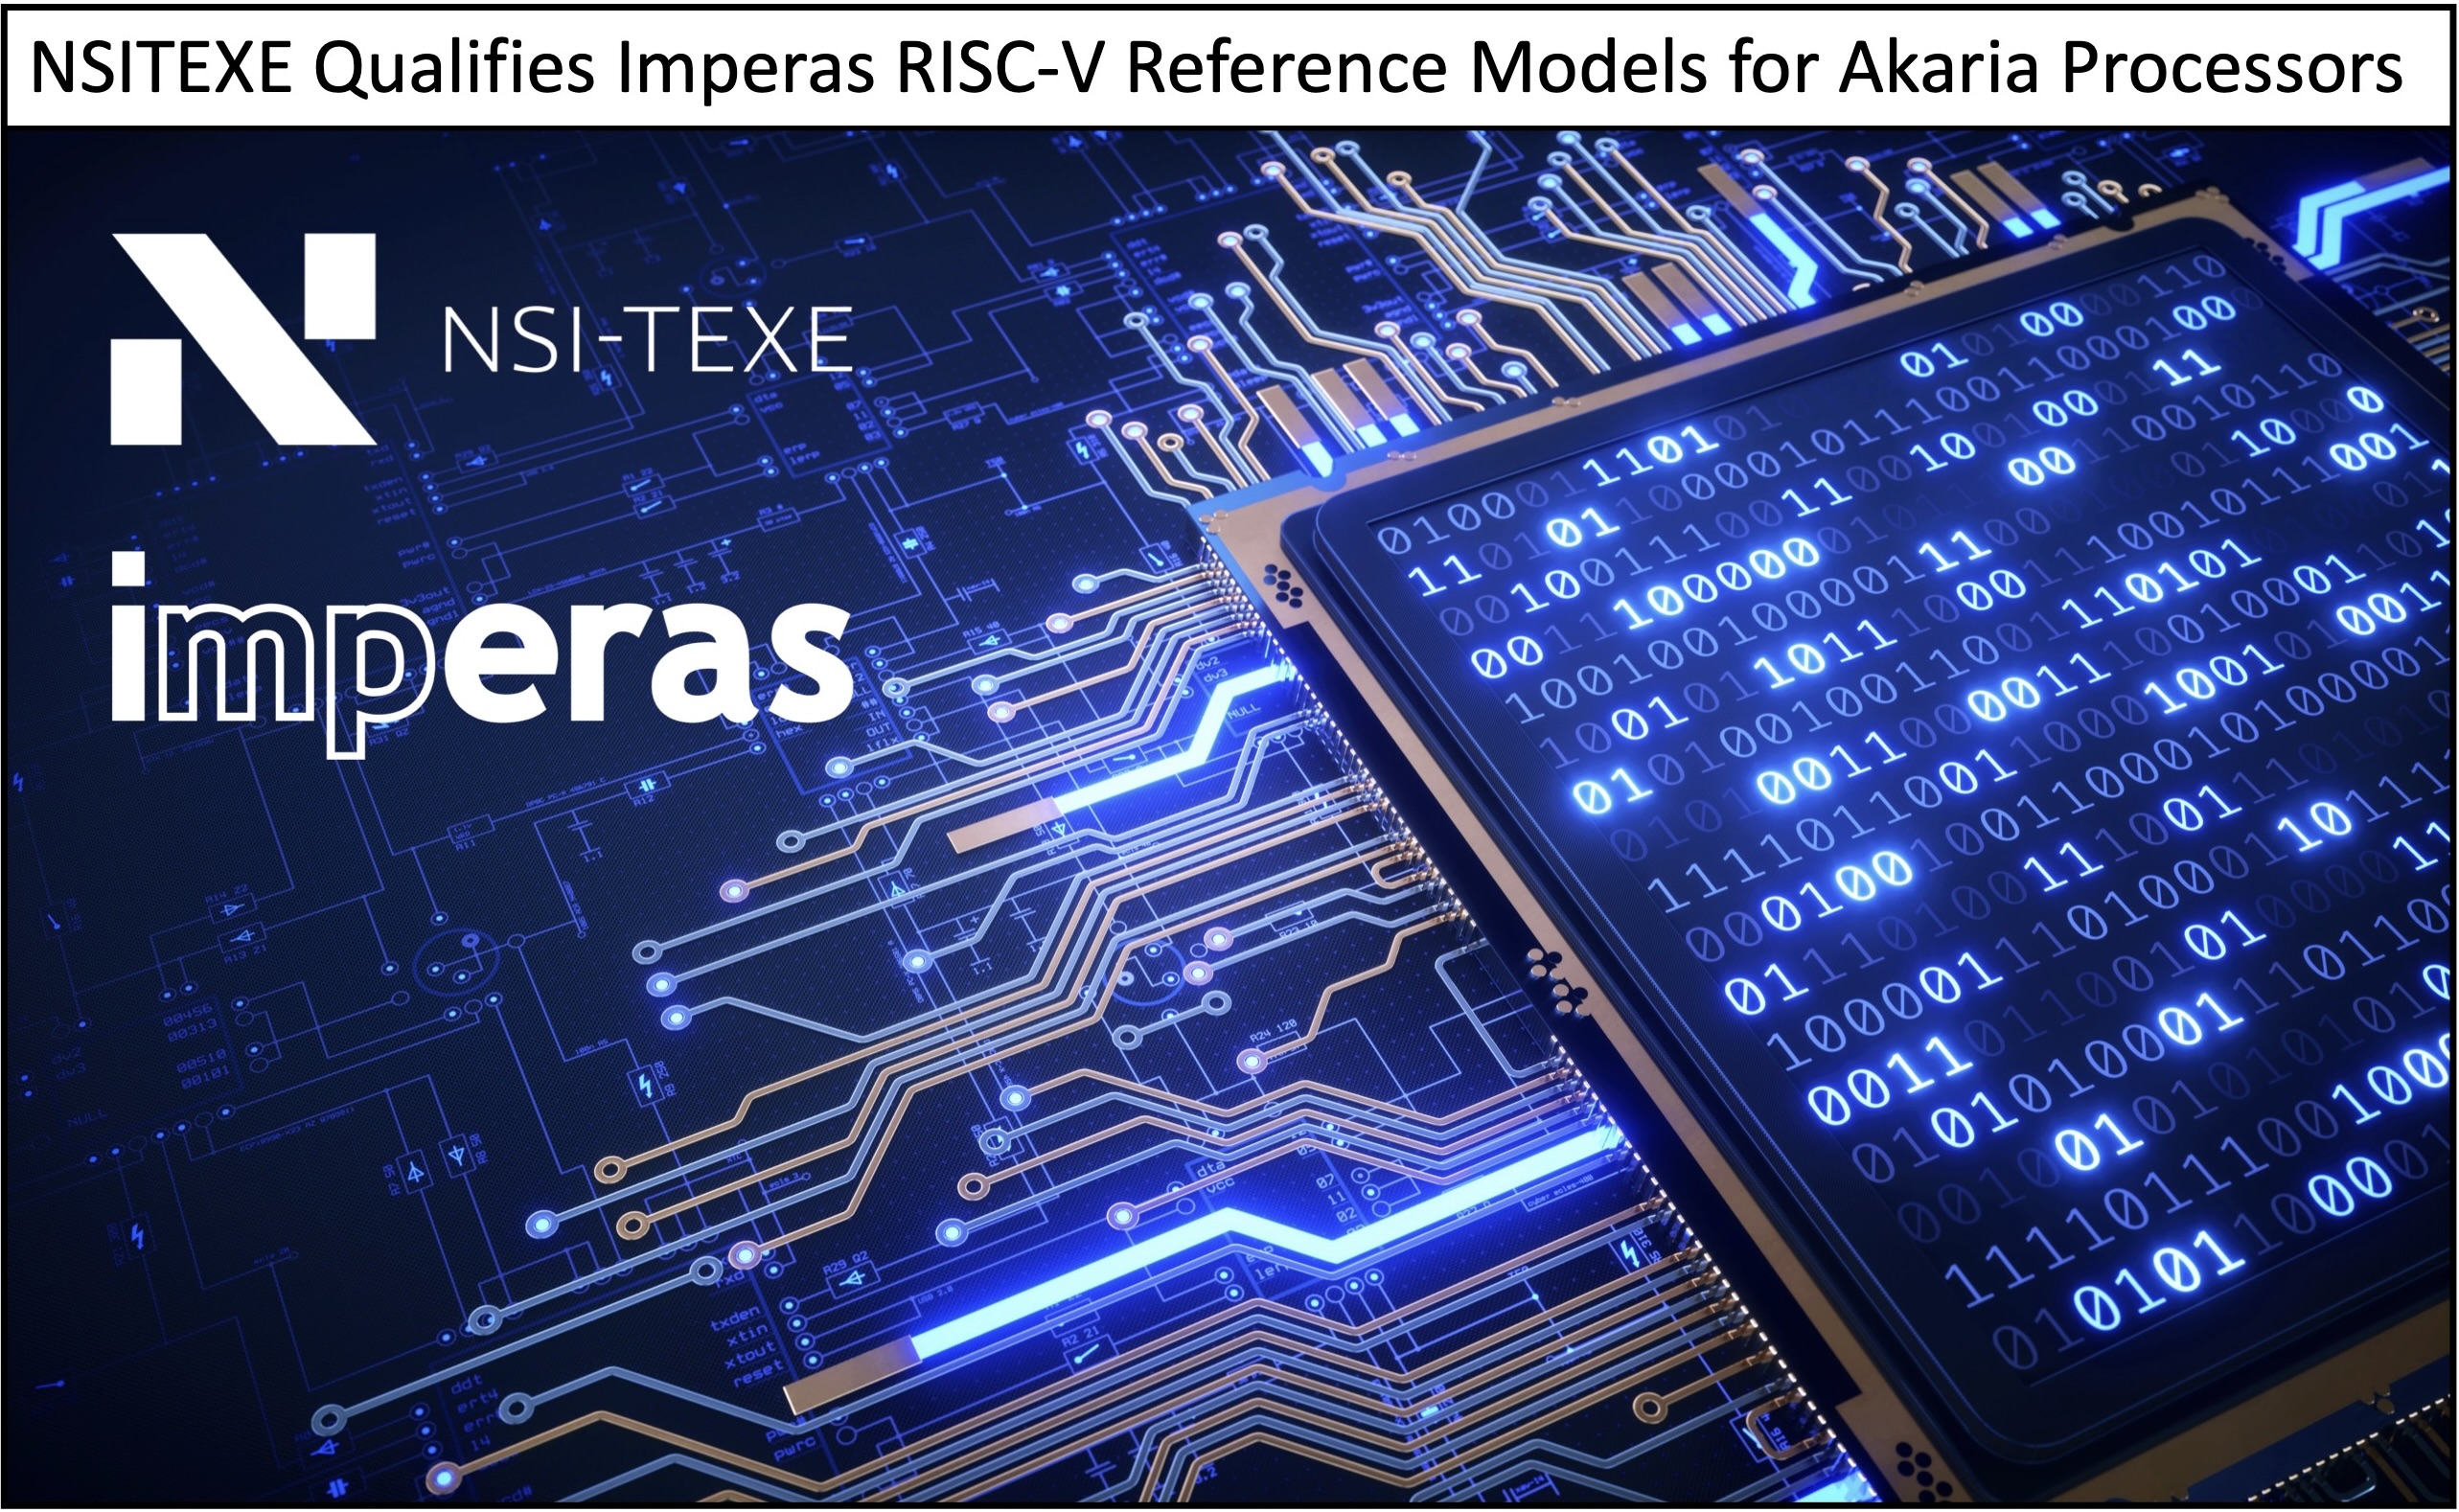 NSITEXE Qualifies Imperas RISC-V Reference Models for Aquaria Processors